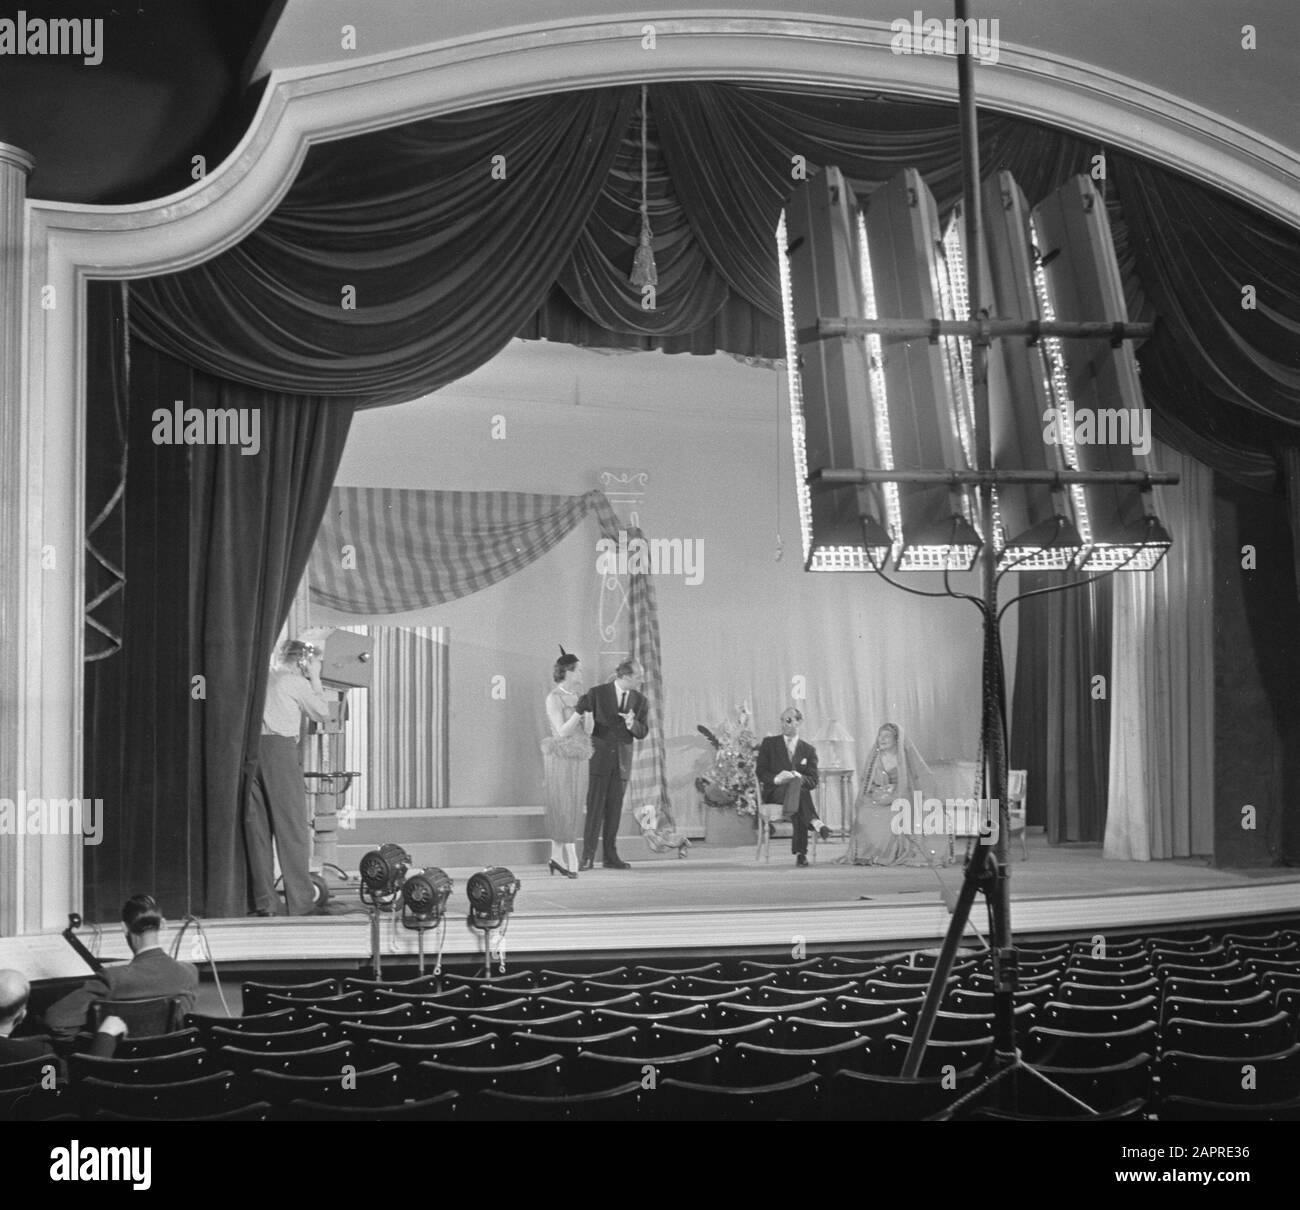 VARA television. Cabaretier Wim Sonneveld in his program Girl with big feet Annotation: First performance in De La Mar theater Date: 27 January 1953 Location: Amsterdam, Noord-Holland Keywords: cabaret, television, theater Person name: Sonneveld, Wim Stock Photo